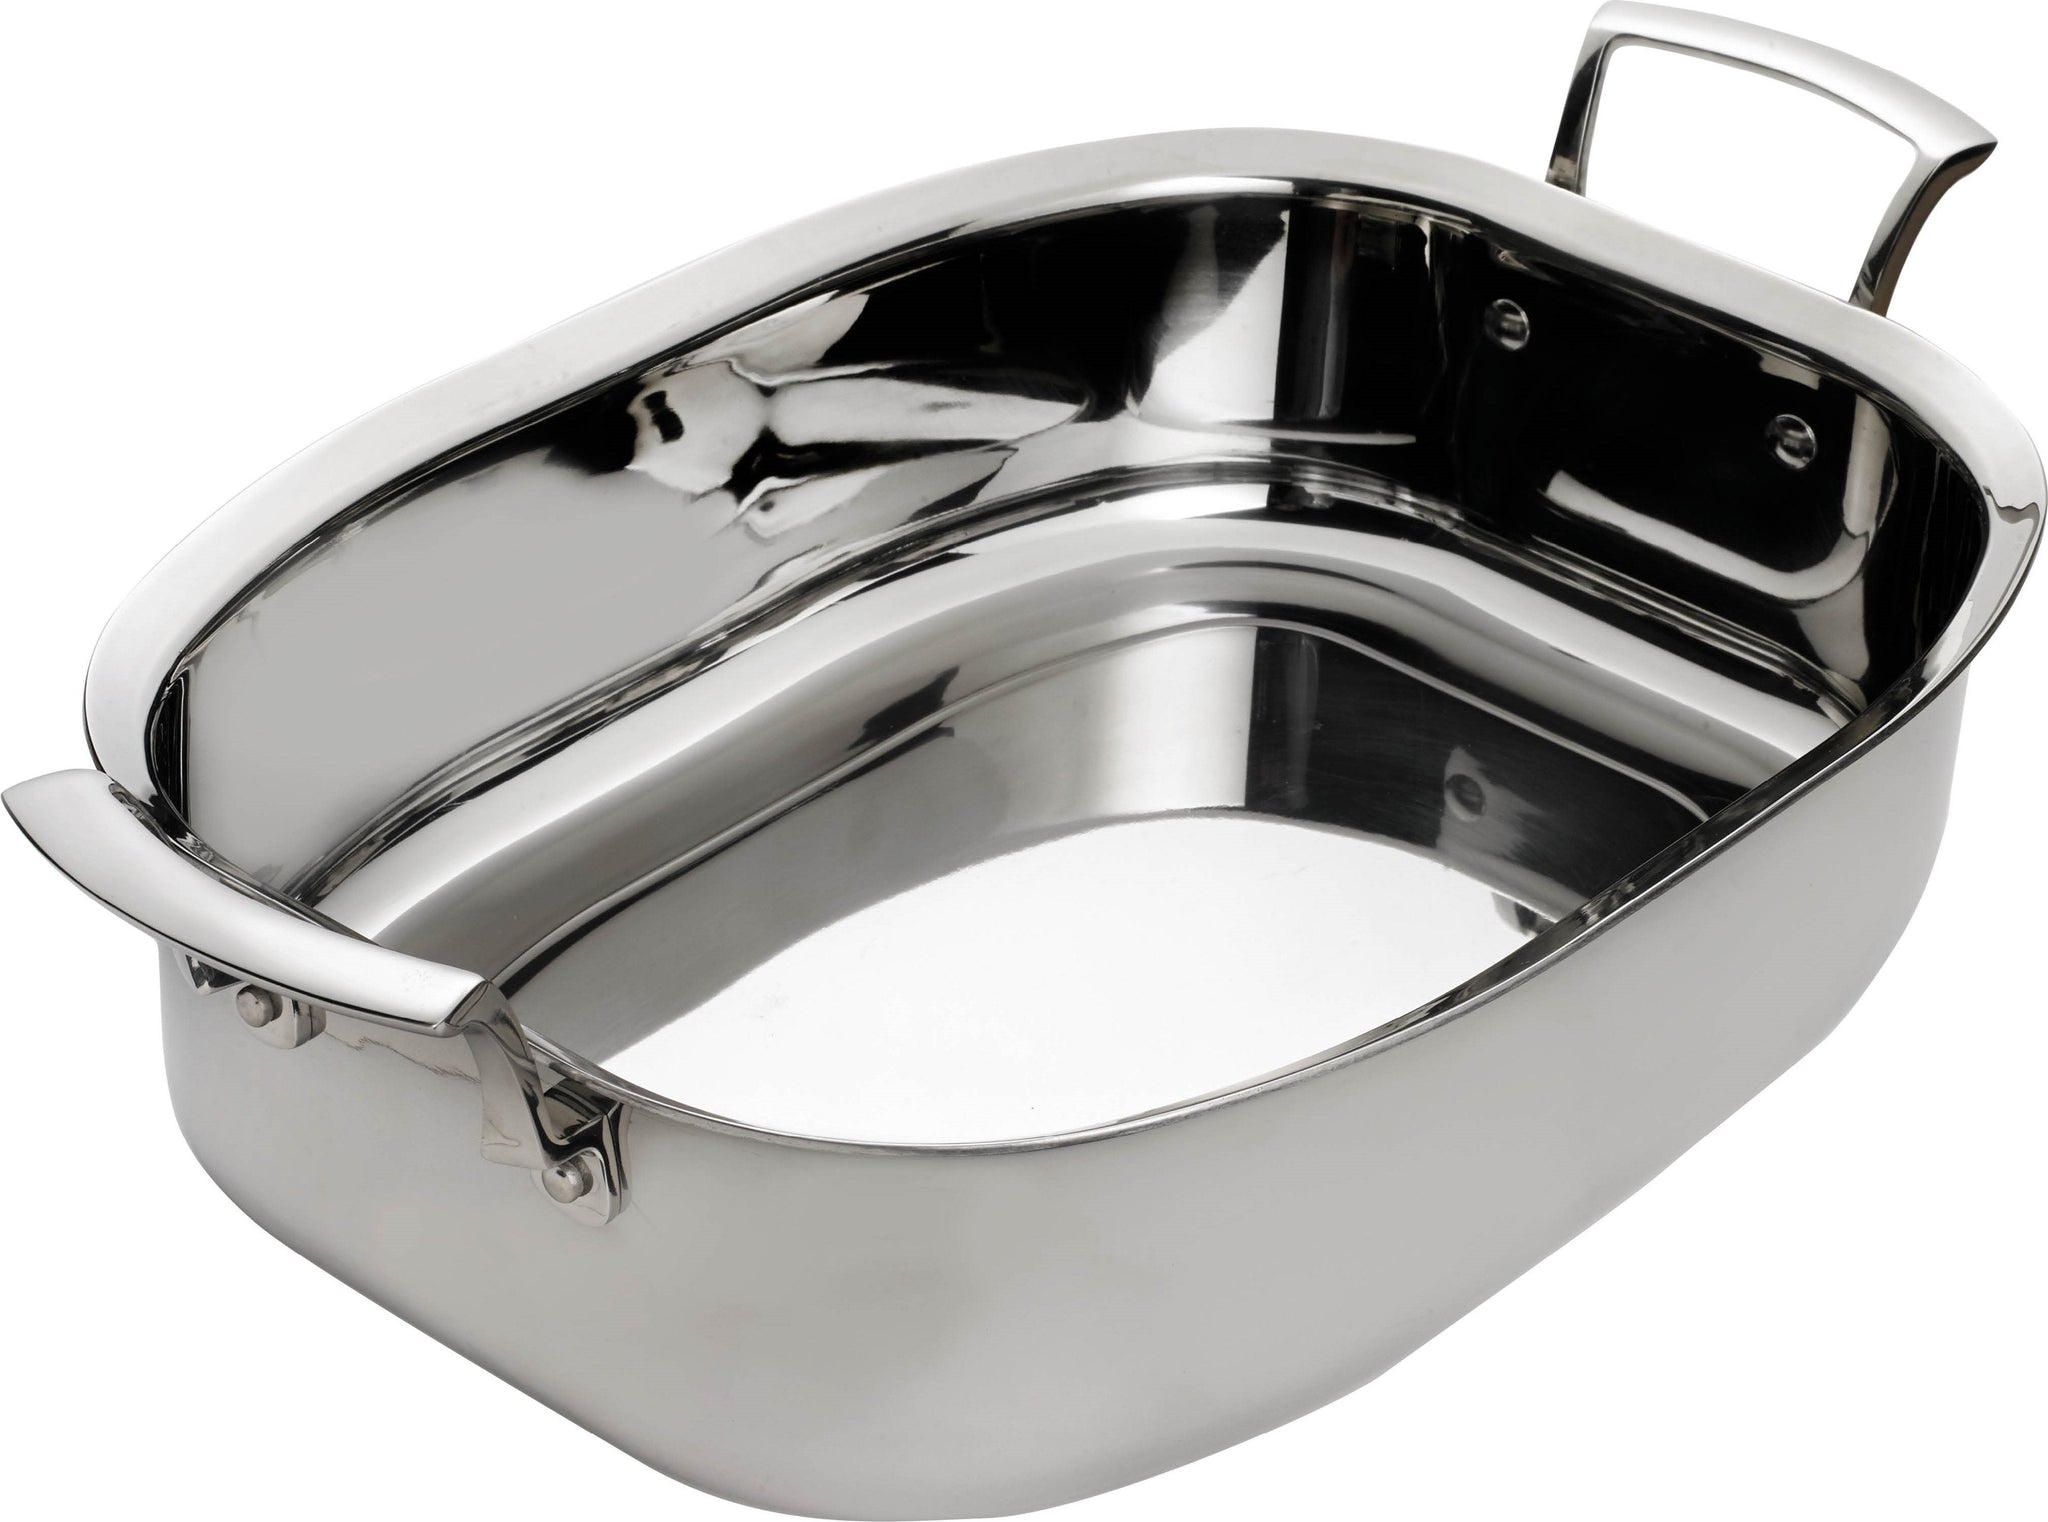 Thermalloy - 6.6 L Oval Roasting Pan (Lid Not Included) - 5724179